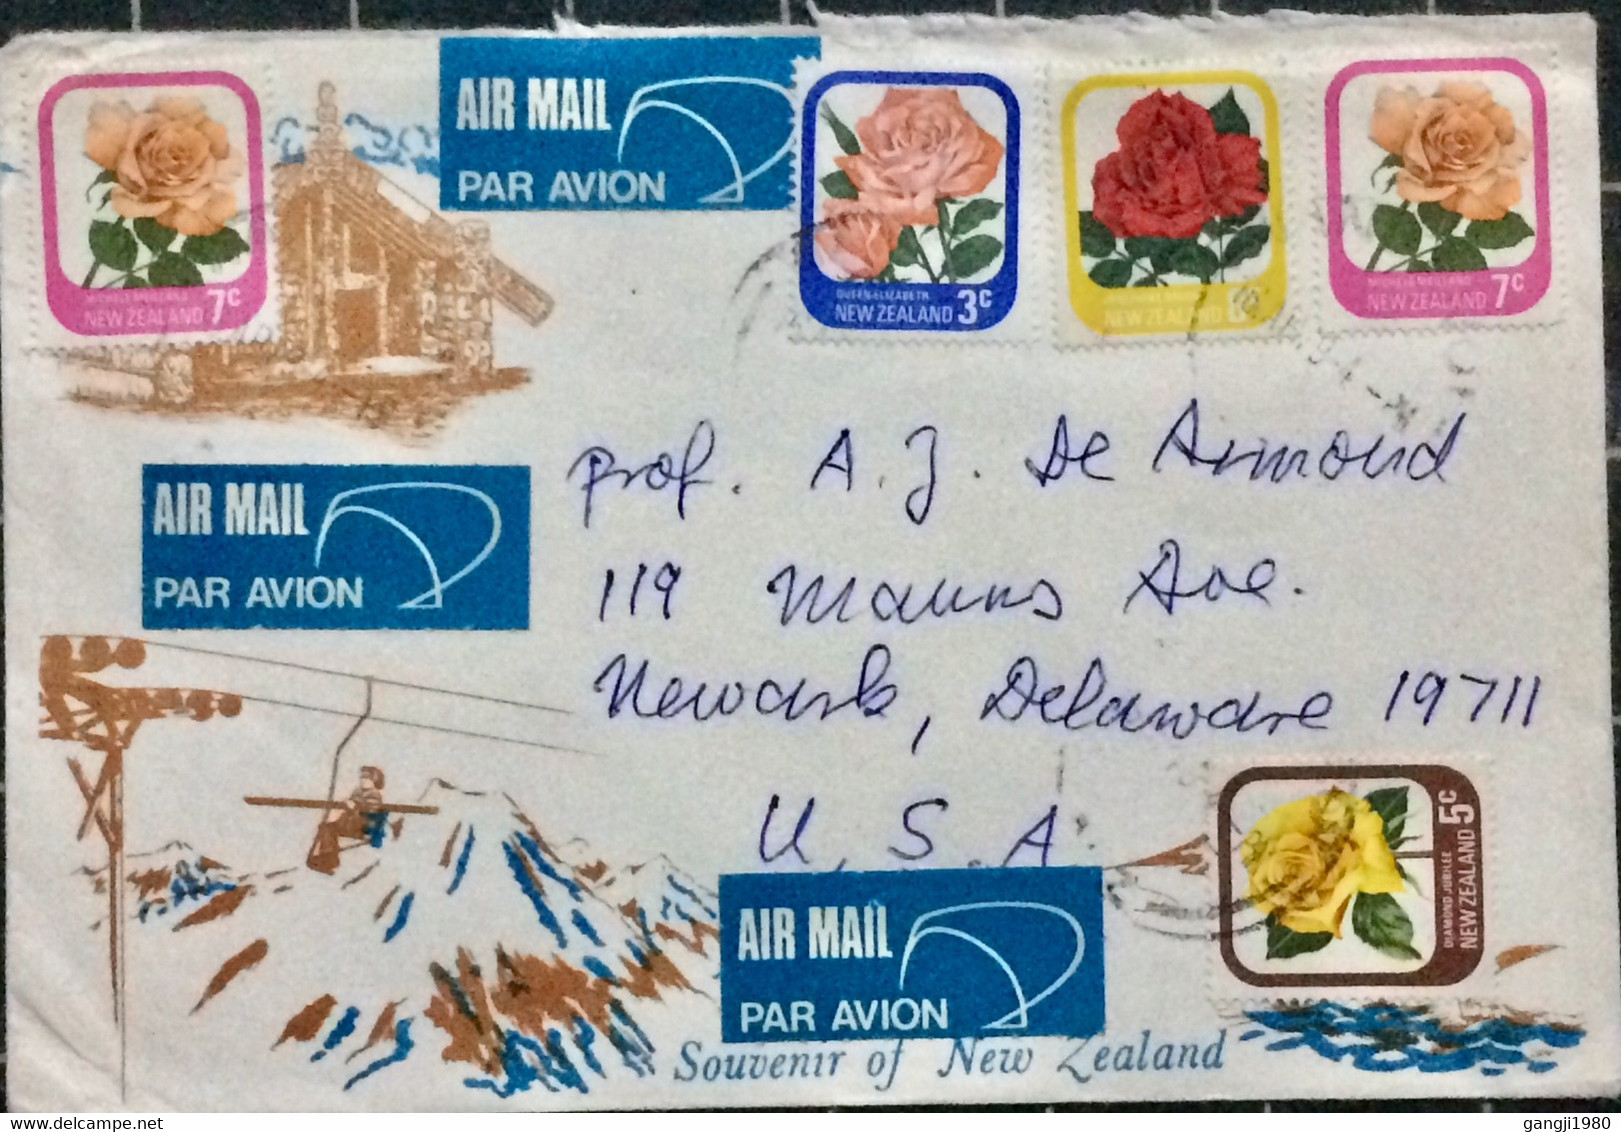 NEW ZEALAND 1976, ILLUSTRATE SOUVENIR, COVER USED TO USA, CHAIR CABLE, BUILDING, ROSE FLOWER  5 STAMP - Lettres & Documents